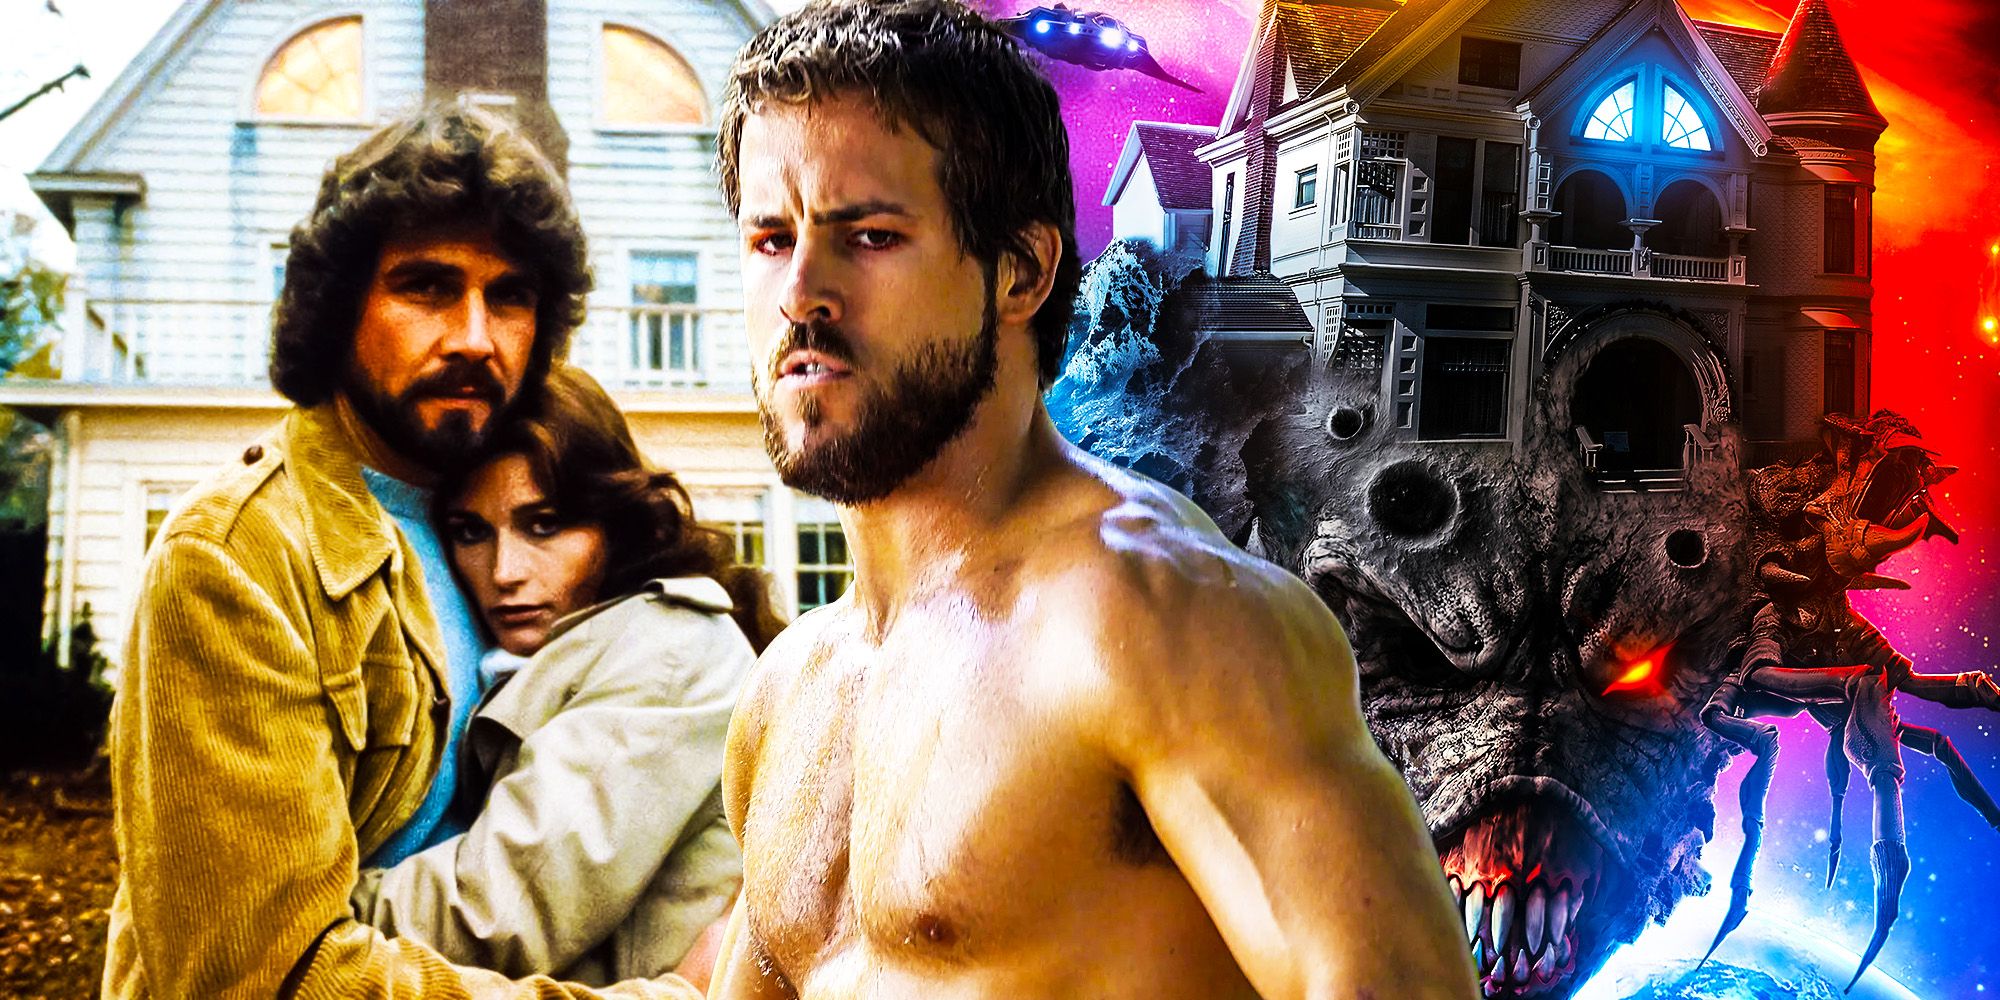 Amityville in space amityville horror movies considered canon